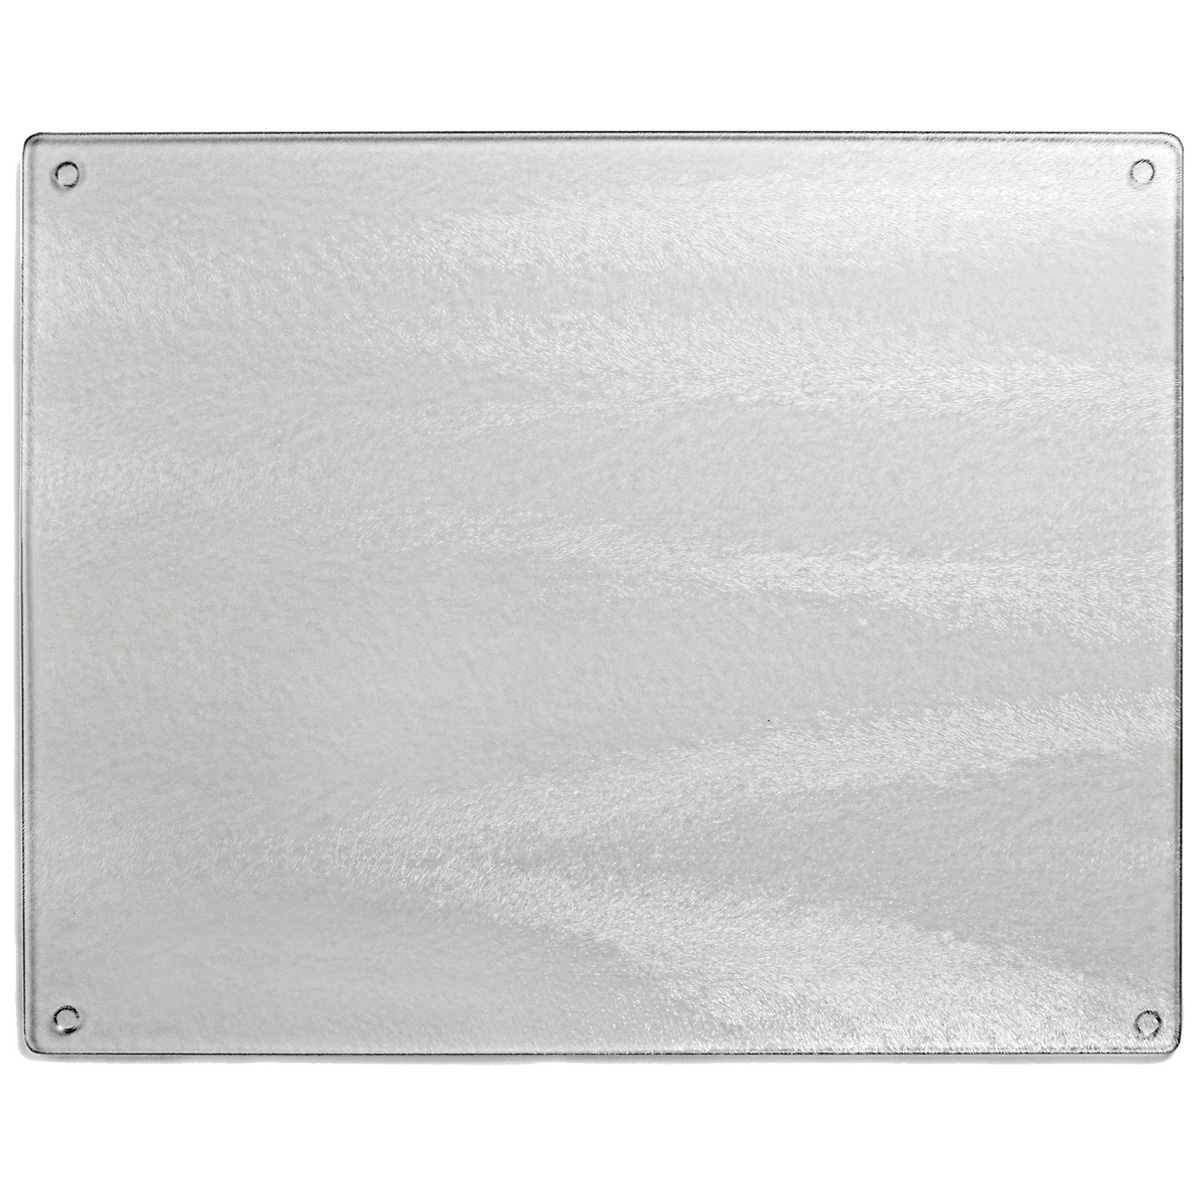 CounterArt Lightly Frosted 3mm Heat Tolerant Glass Cutting Board 20" by 16" - image 1 of 6